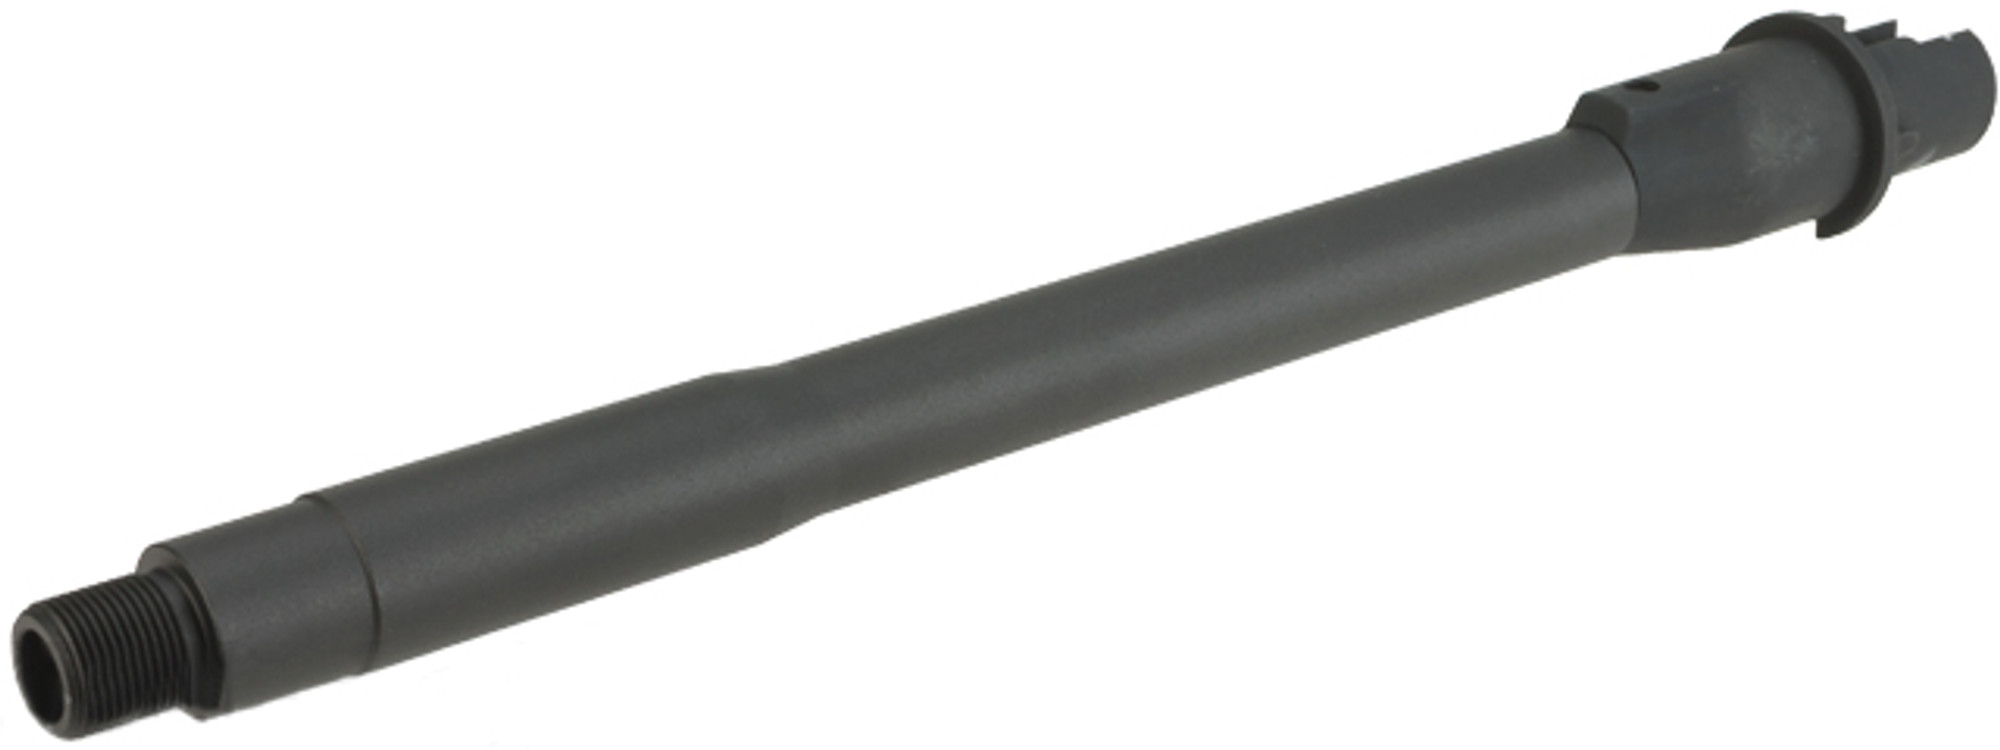 Krytac Trident M4 CRB 10.5" One Piece Outer Barrel Assembly for M4 / M16 Series Airsoft AEG Rifles